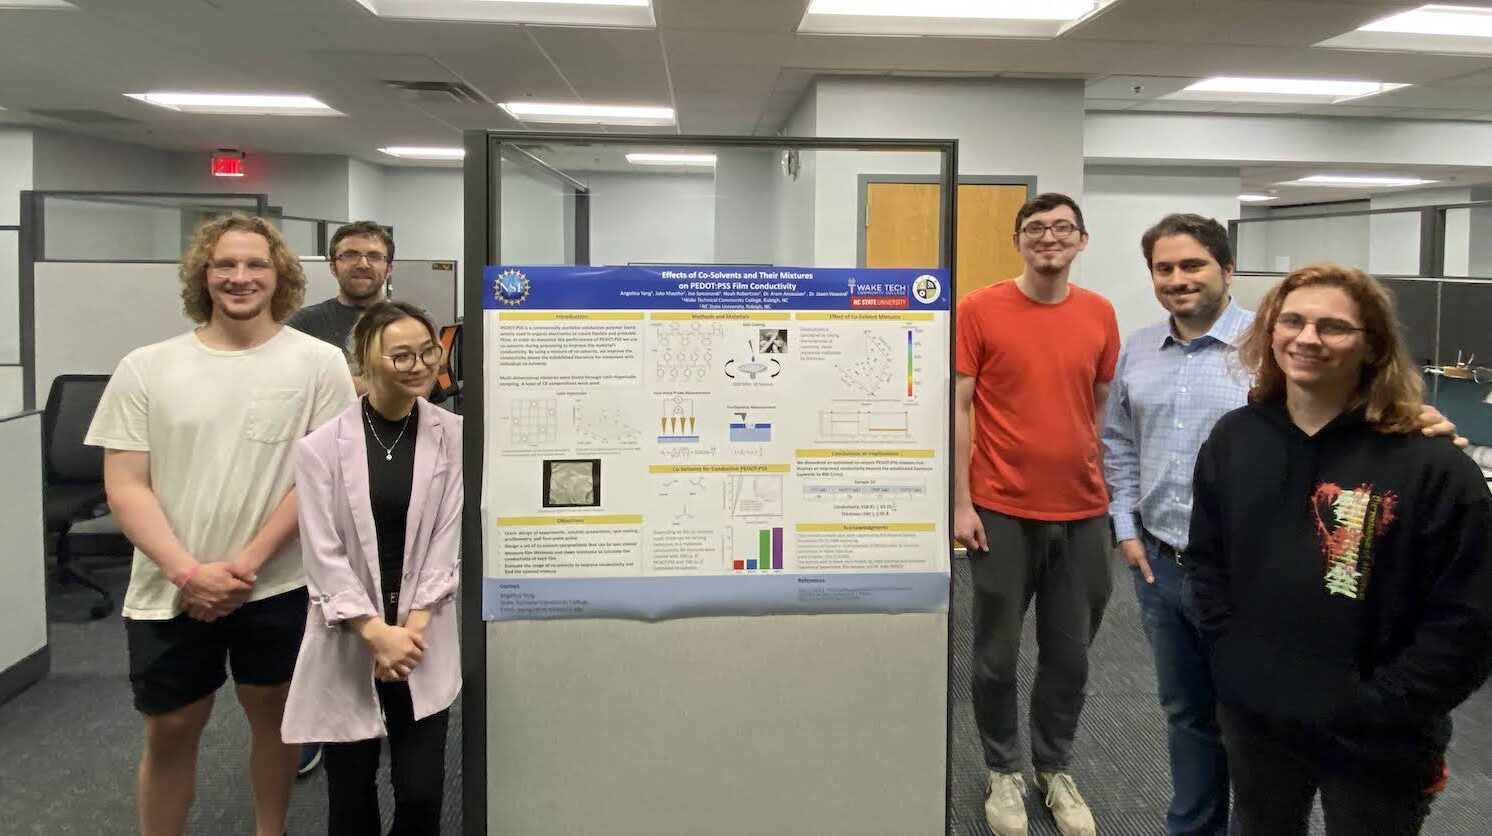 Students and faculty gather with a research poster